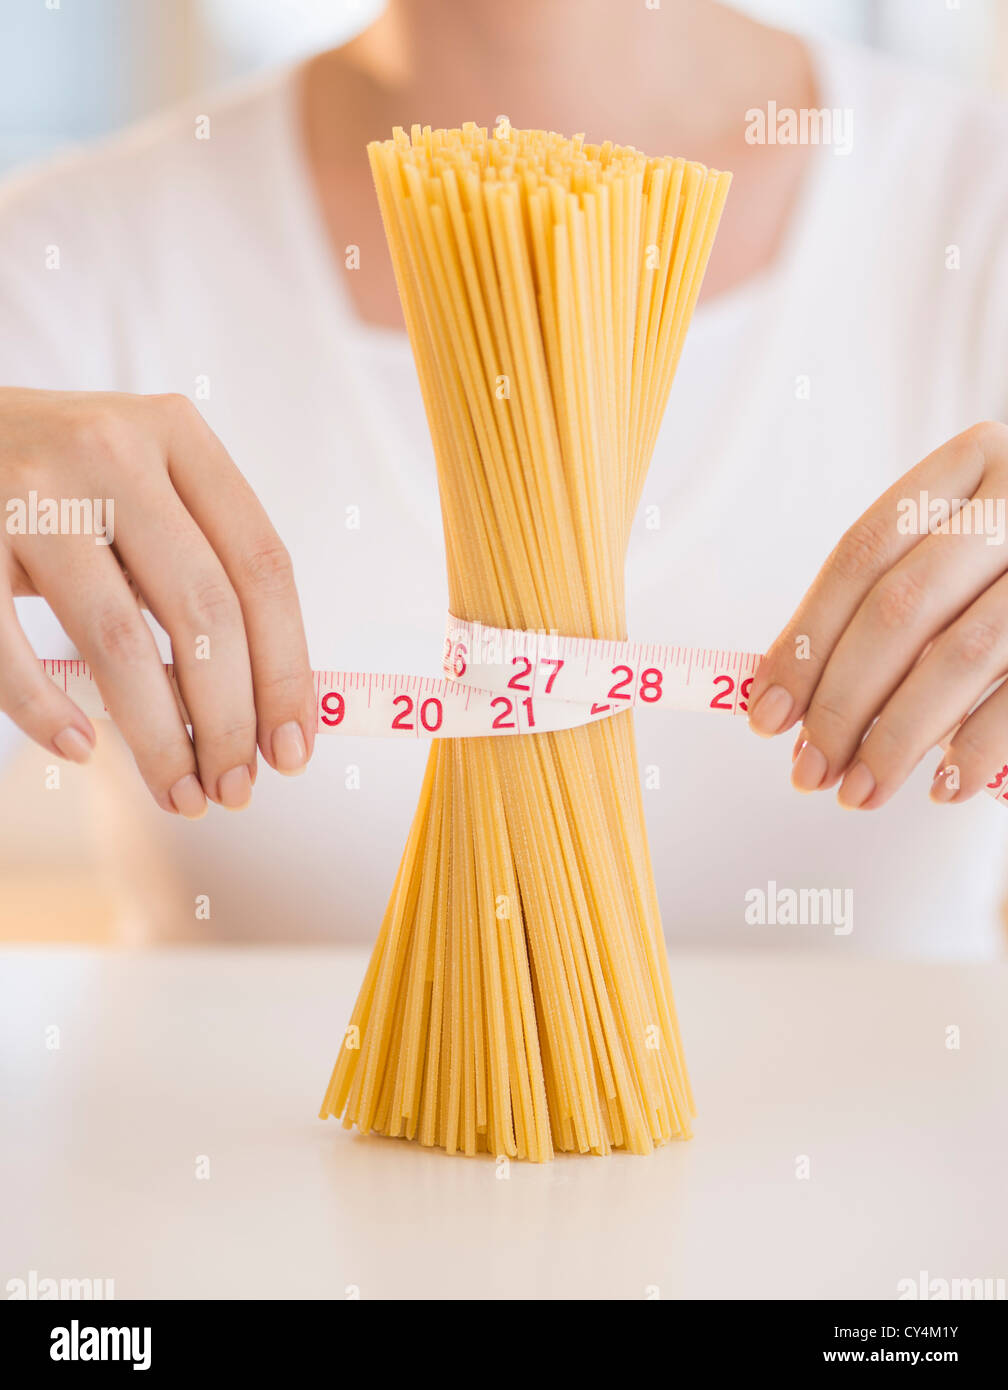 USA, New Jersey, Jersey City, Close up of woman's hands measuring pasta with tape measure Stock Photo